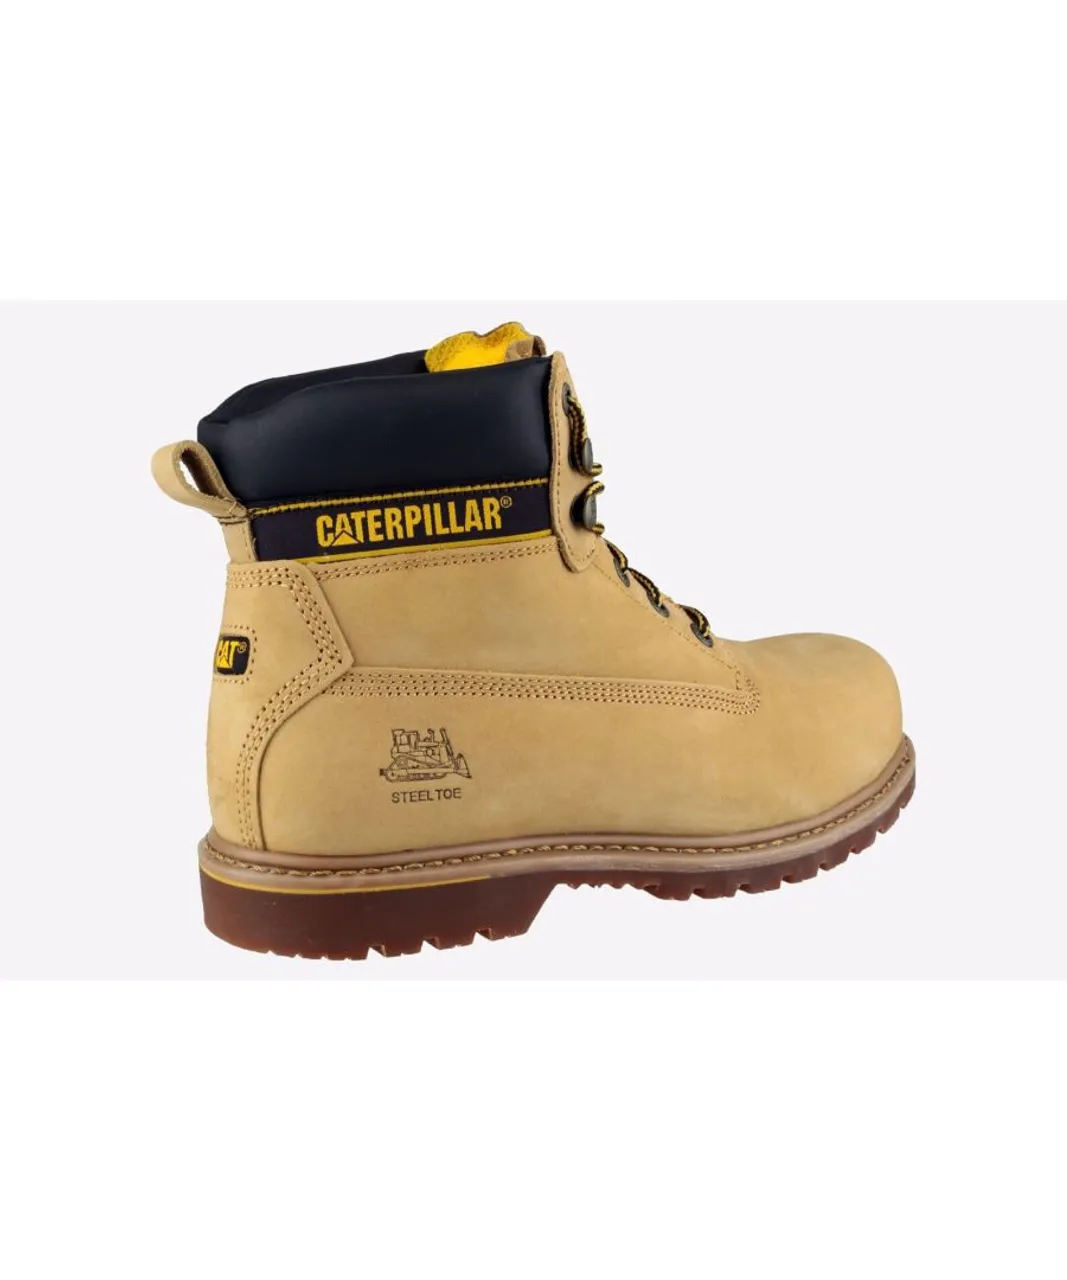 Caterpillar Holton S3 Safety Boot Leather Mens - Tan